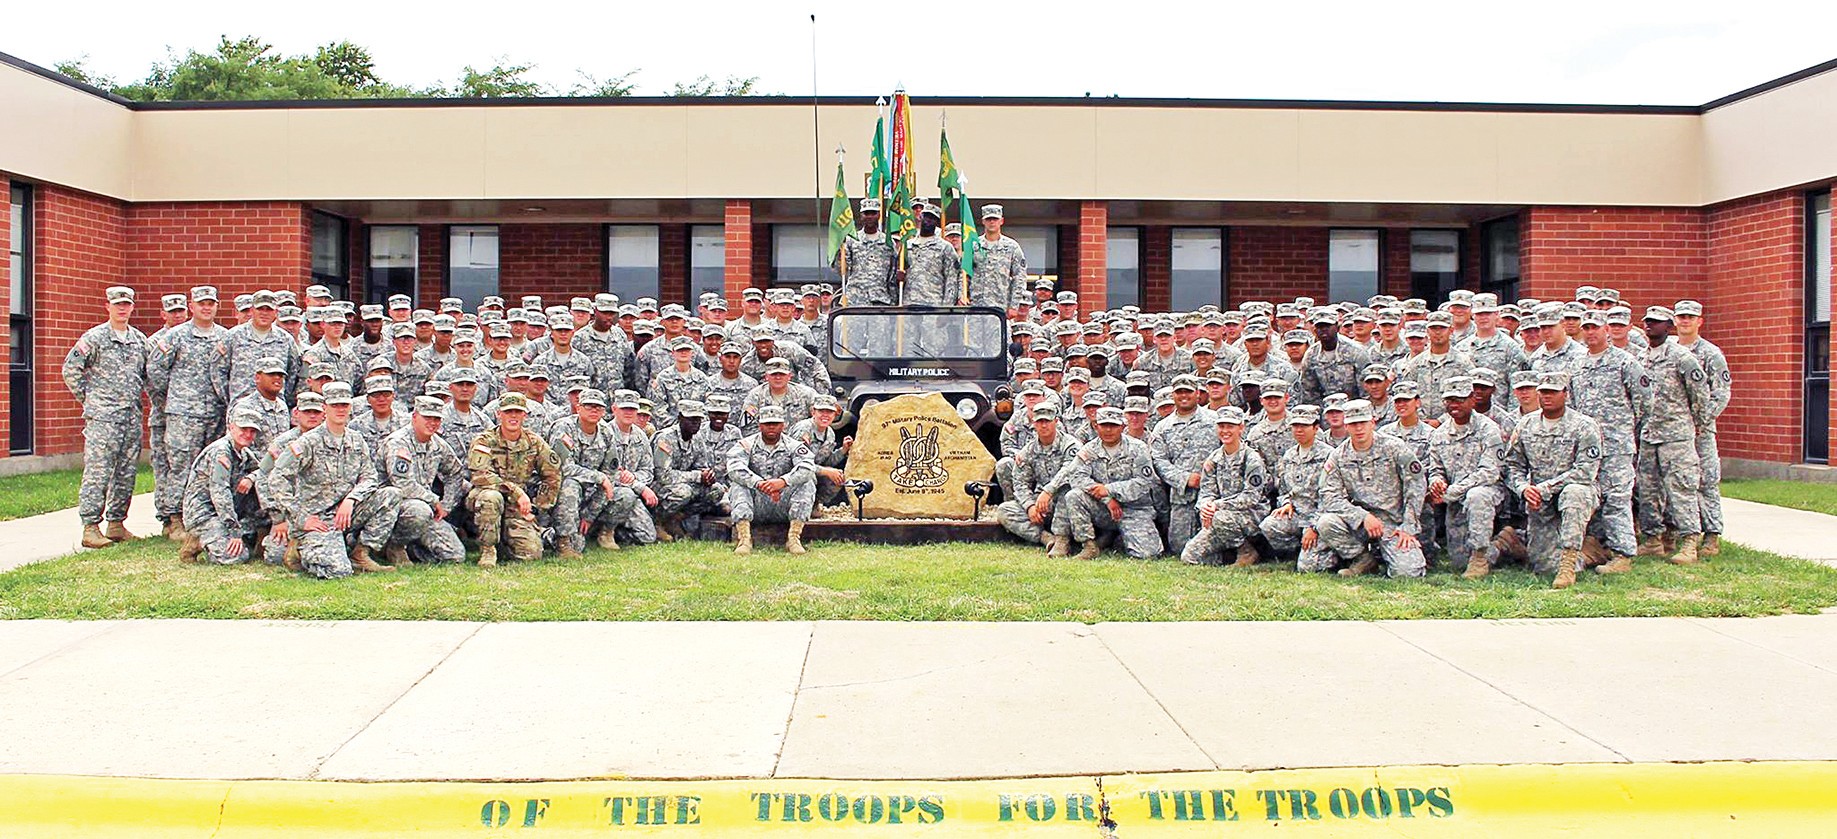 97th Military Police Battalion from Fort Riley, Kansas, remembers 50th